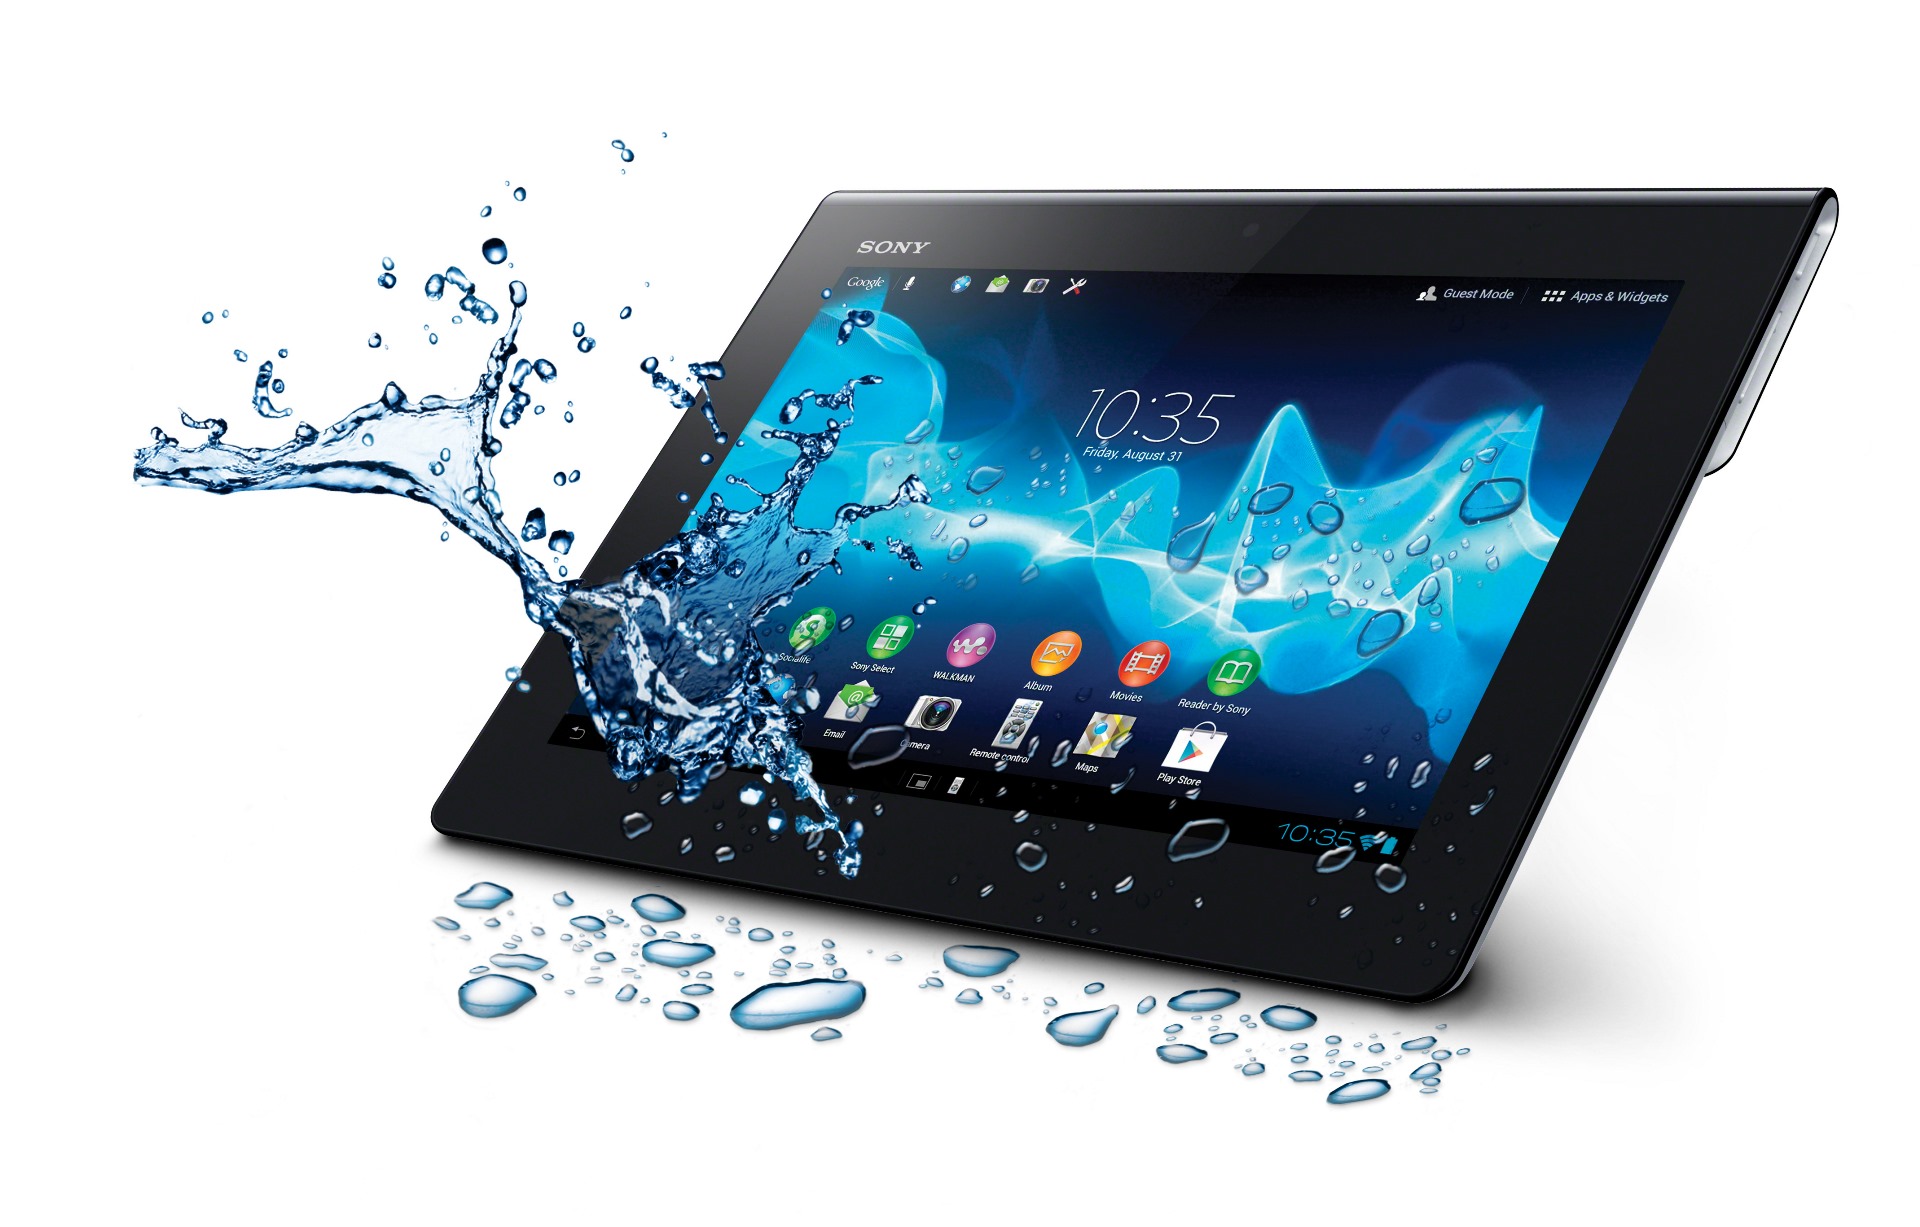 sony-xperia-tablet-s-review-xperia-tablet-s-1920x1227